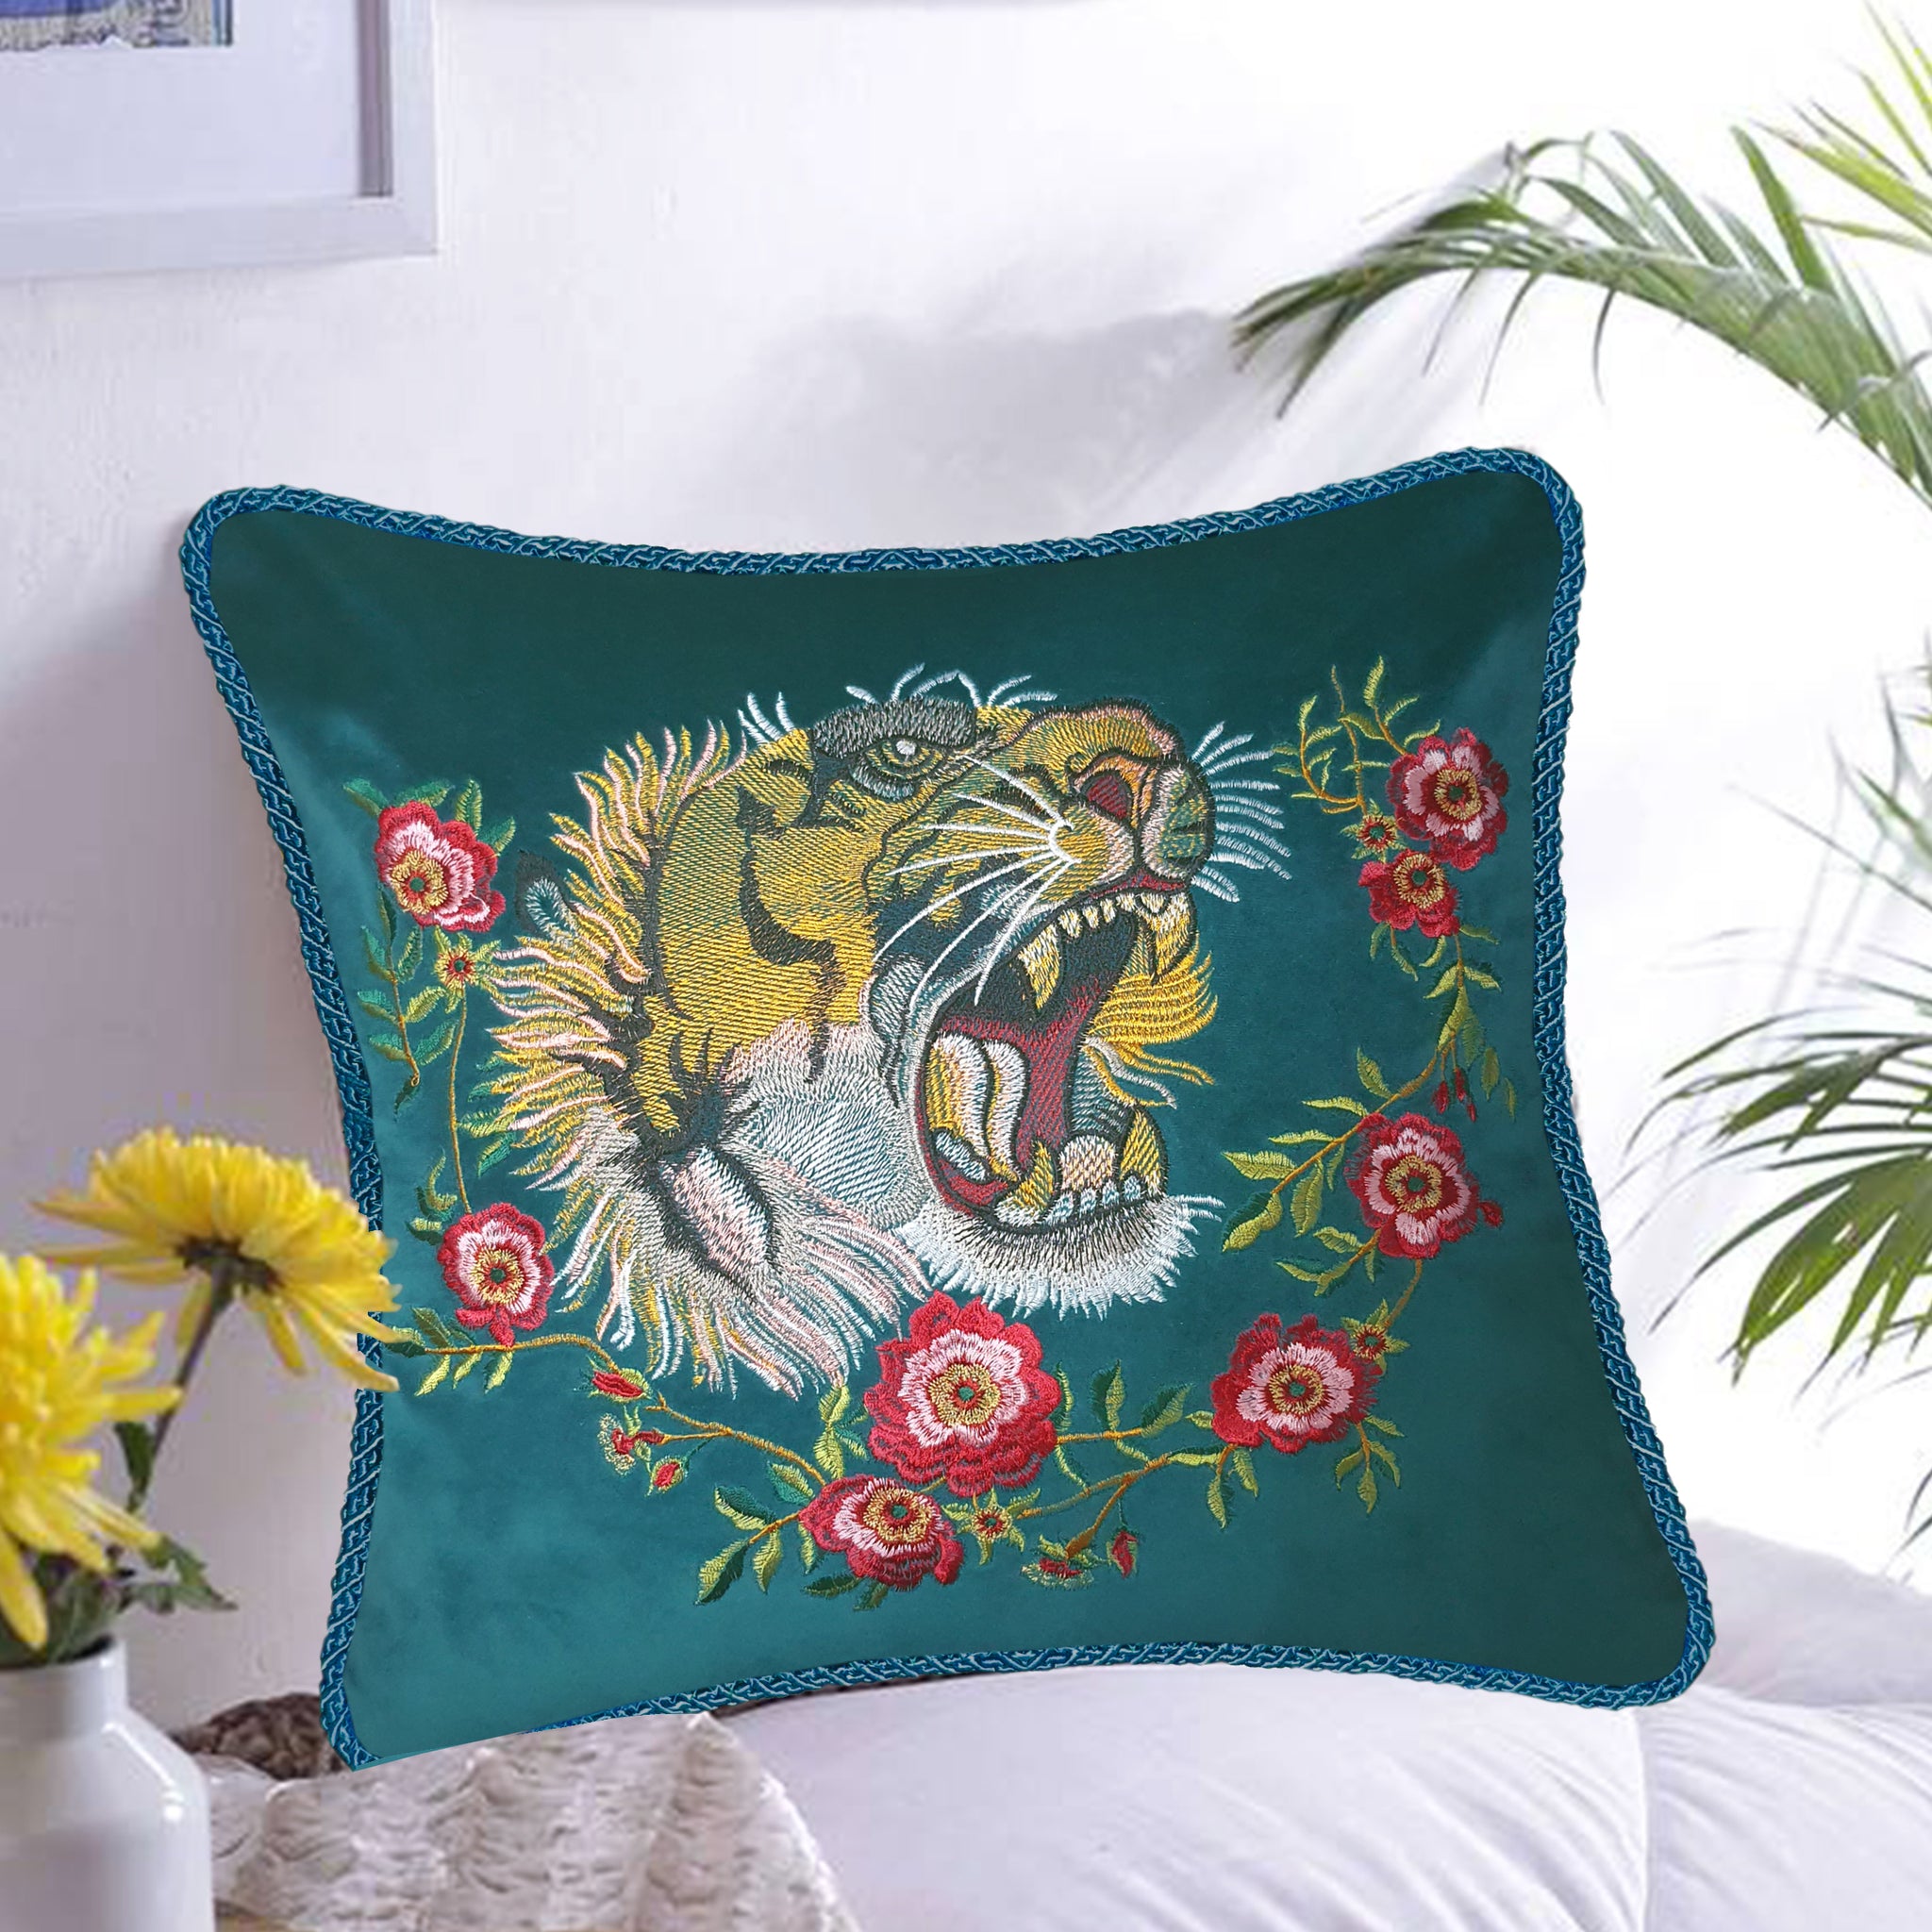 Velvet Cushion Cover Angry Tiger Embroidery Decorative Pillowcase Modern Home Decor Throw Pillow for Sofa Chair Living Room 45x45 cm